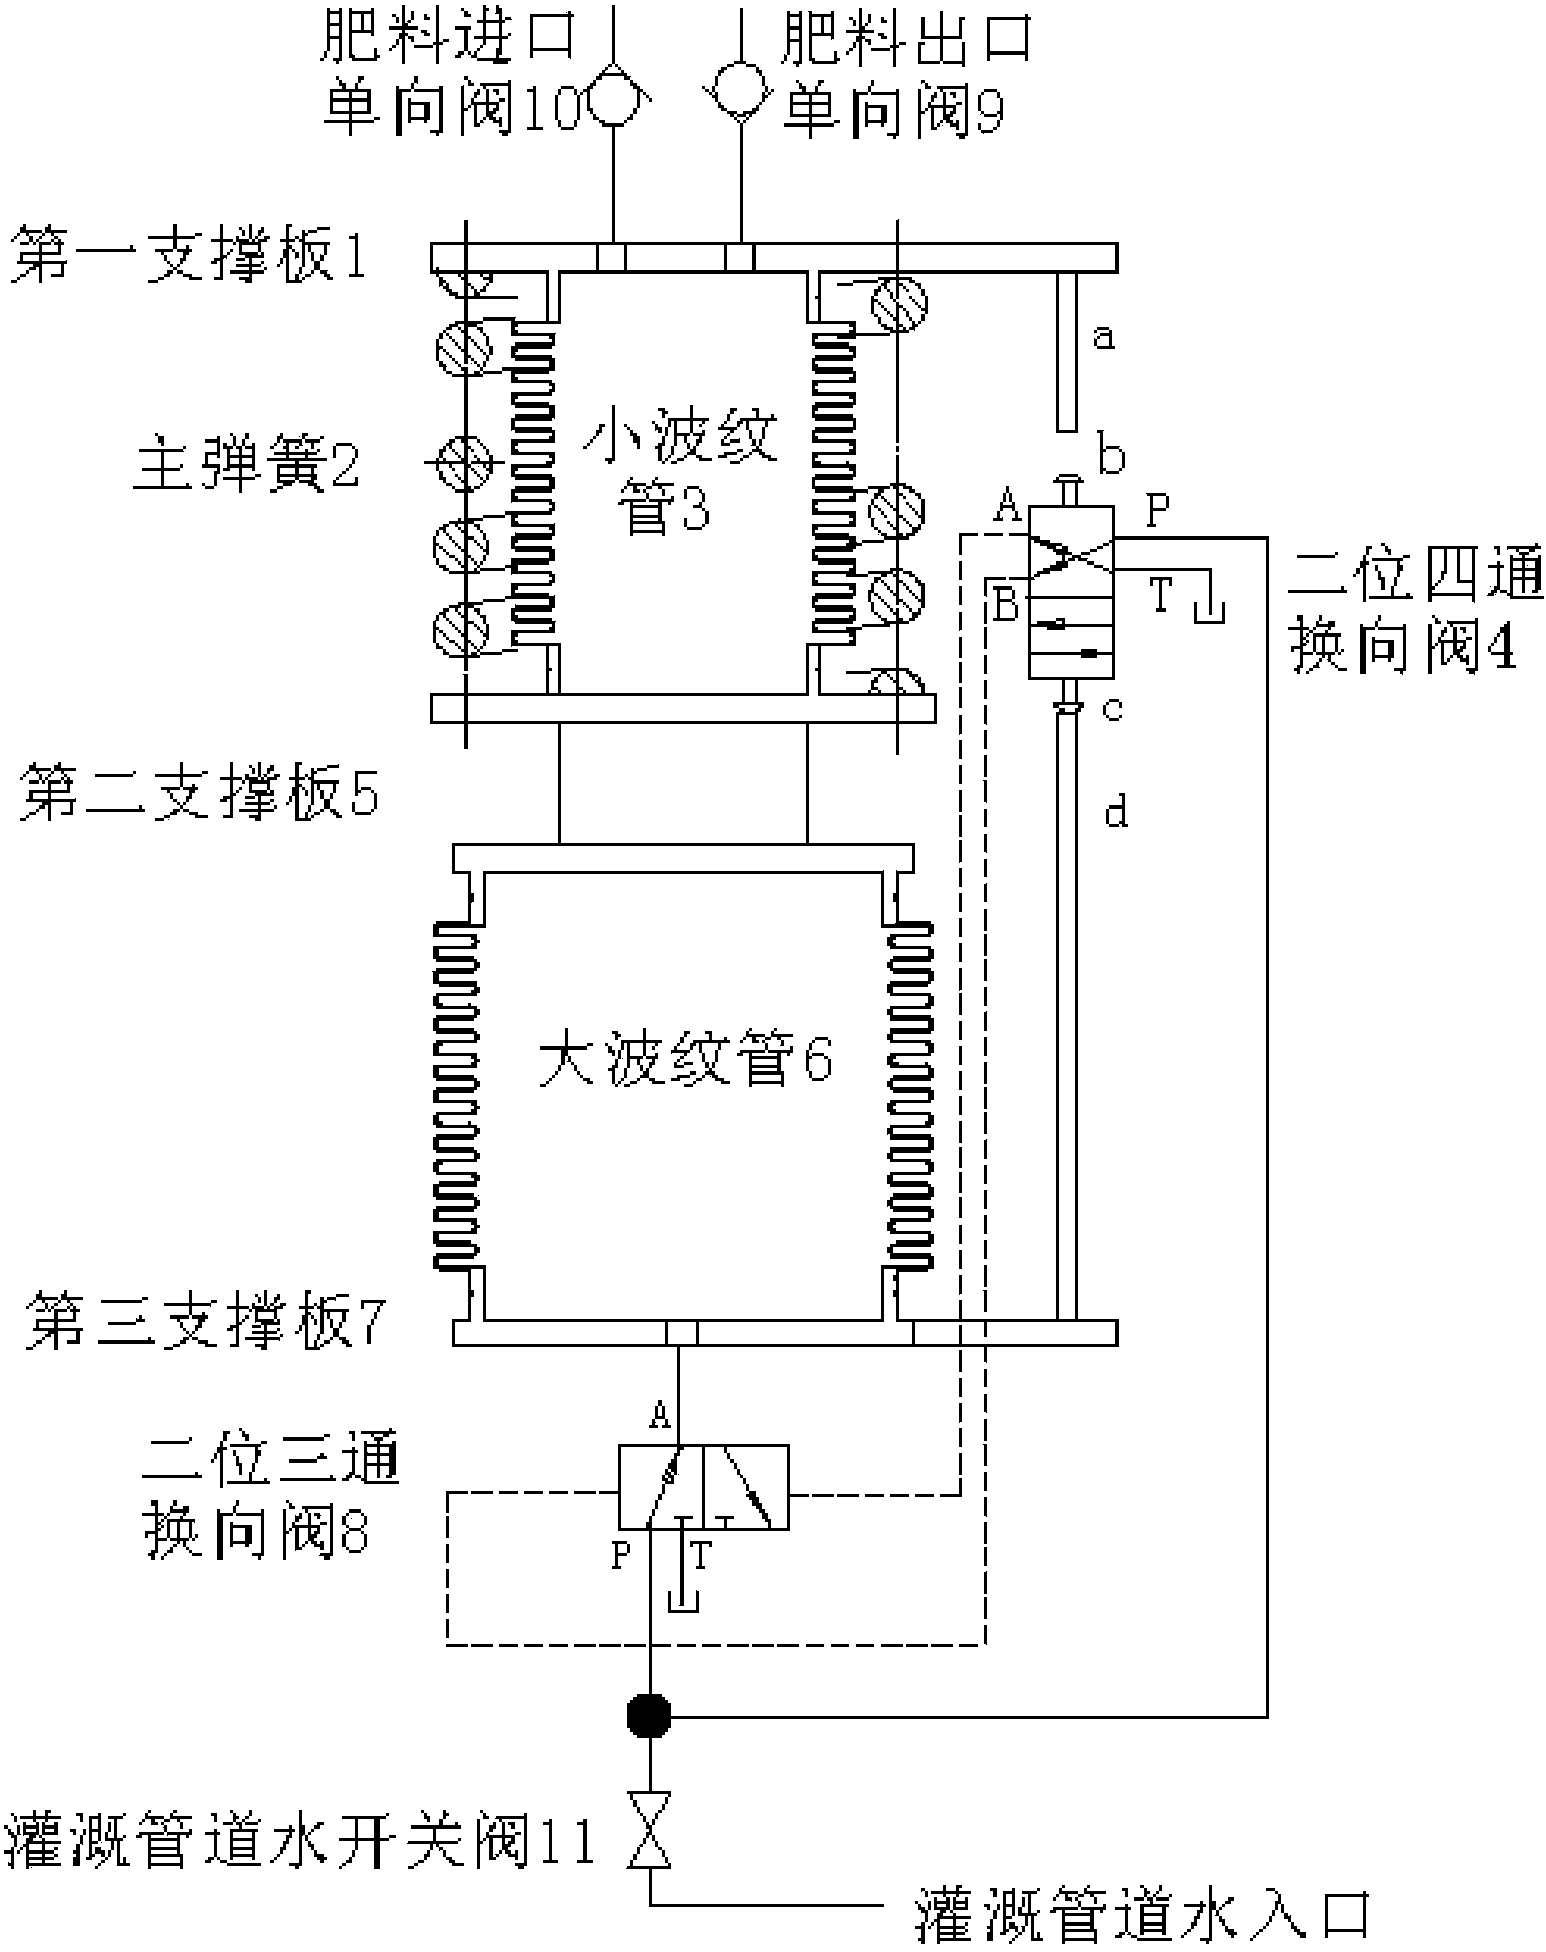 Full-hydrodynamic automatically-controlled supercharged fertilizer apparatus